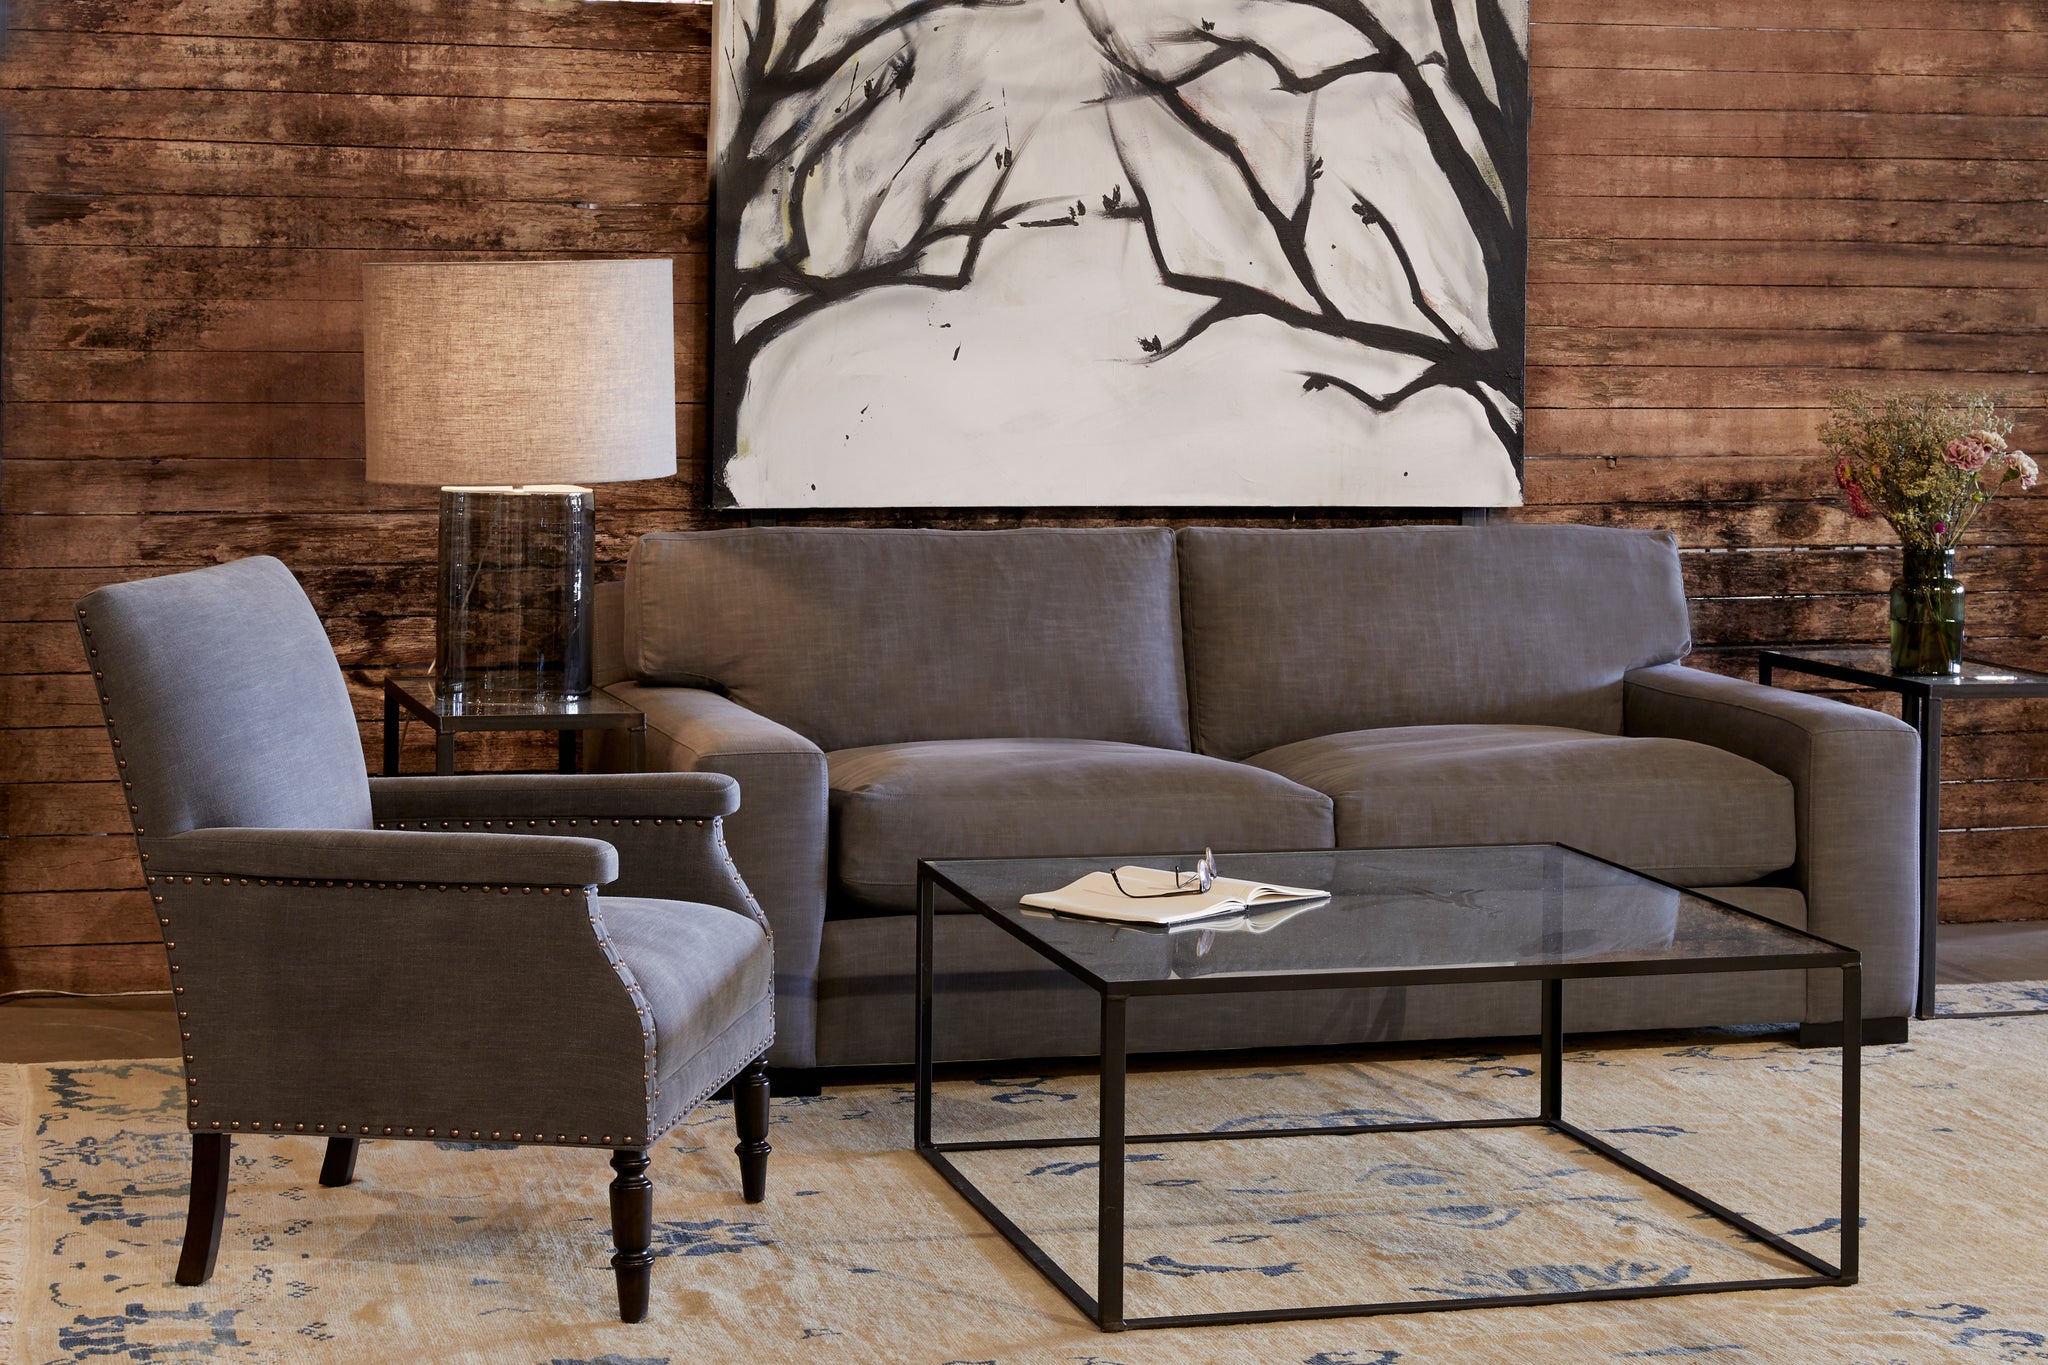  In a showroom with moody lighting, the Loft sofa is in Molino Slate, in front of a wood wall with a black and white painting on the wall. Metal and glass side tables with a Cylinder table lamp on the left and flowers on the right side. A square metal and glass coffee table in front with a book vase and reading glasses on top. The Hailey Chair in Molino Slate is on the left. Photographed in Molino Slate. 